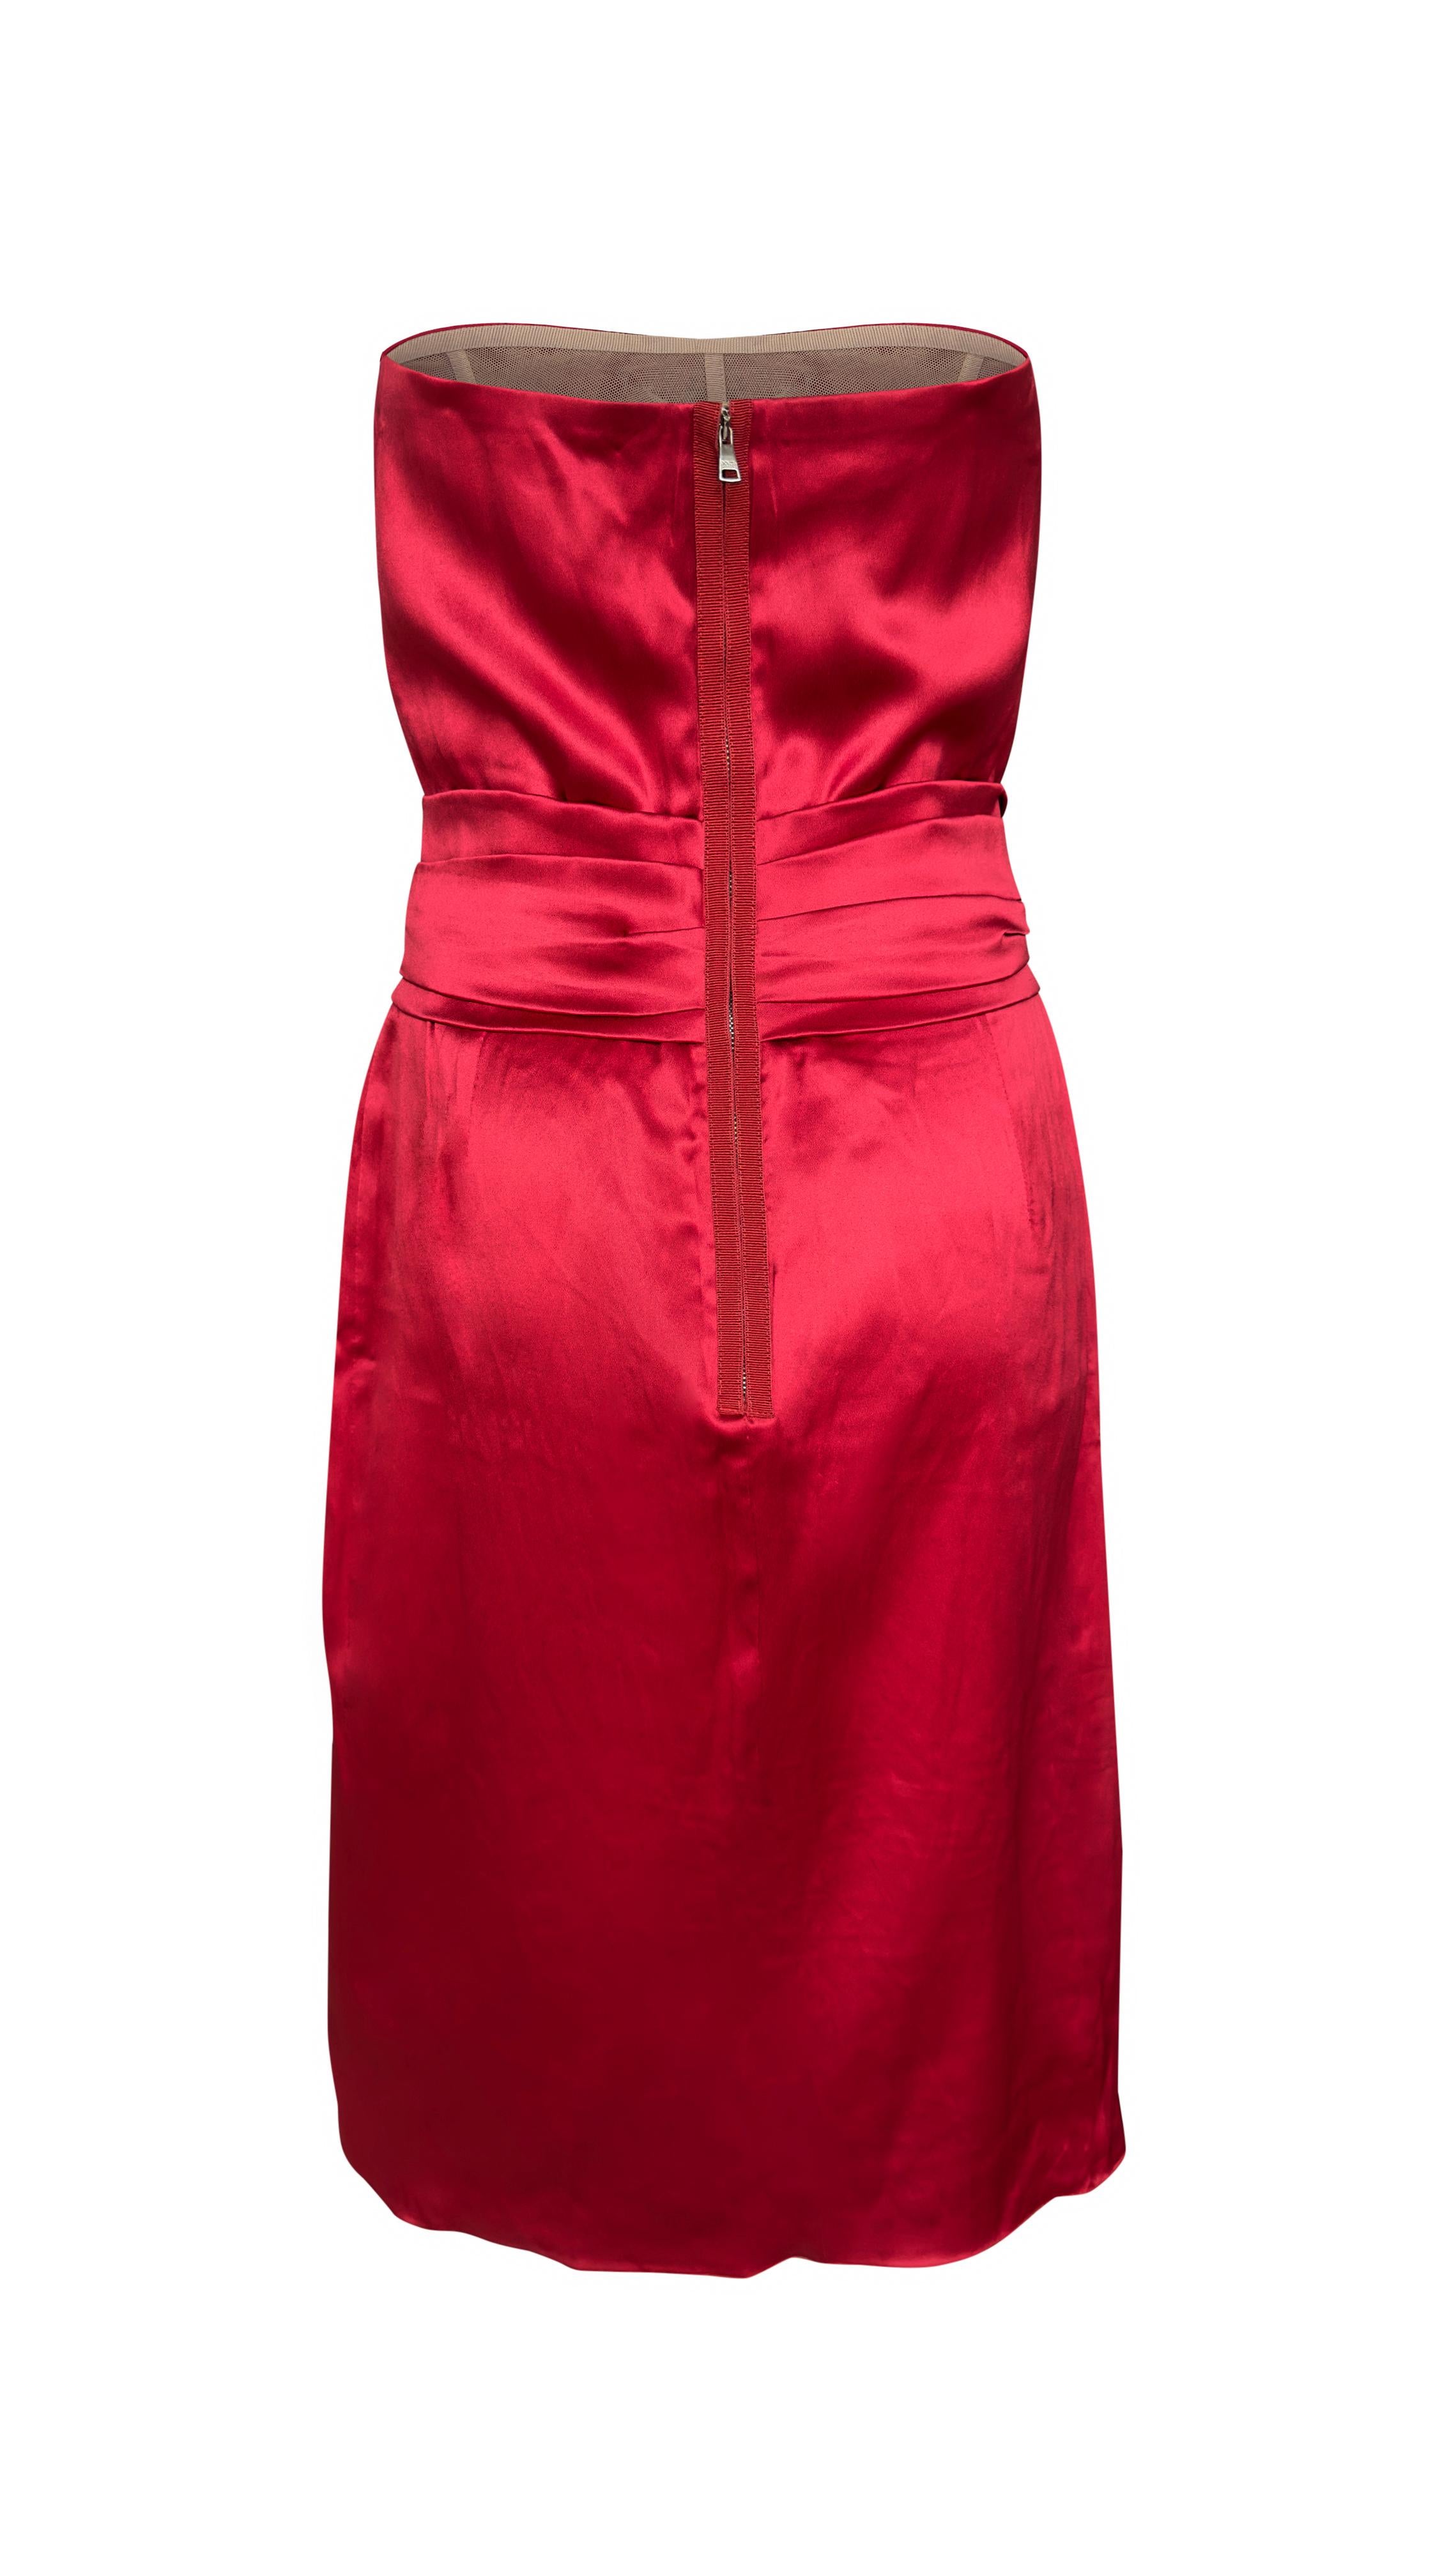 Dolce & Gabbana Red Satin Silk Embellished Draped Strapless Dress M In Excellent Condition For Sale In London, GB